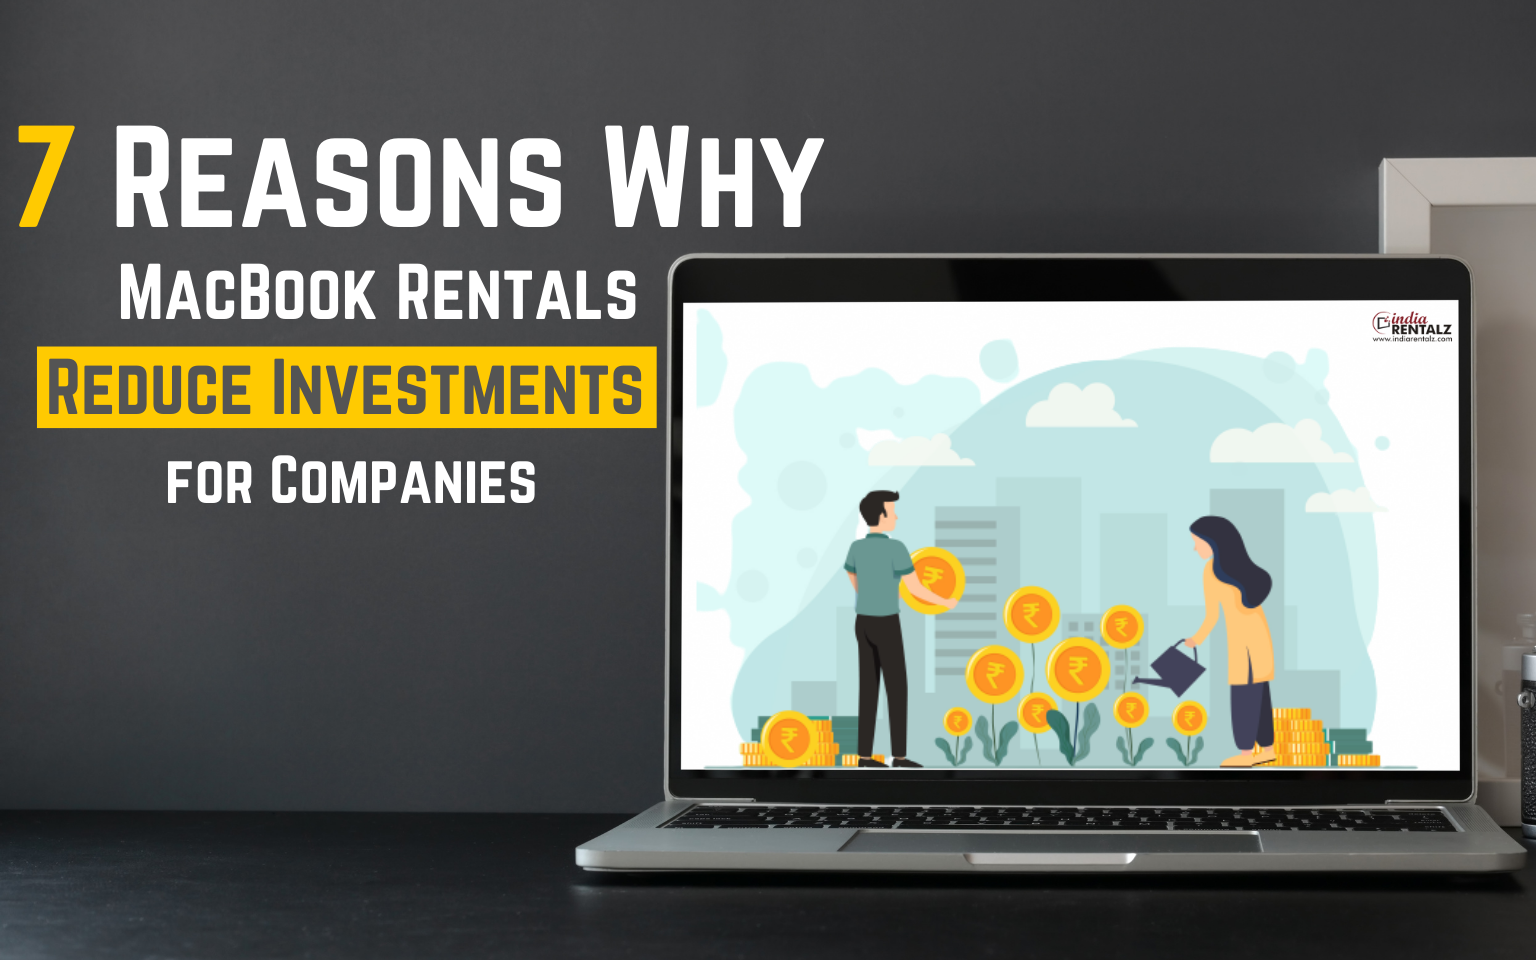 7 Reasons Why MacBook Rentals Reduce Investments for Companies